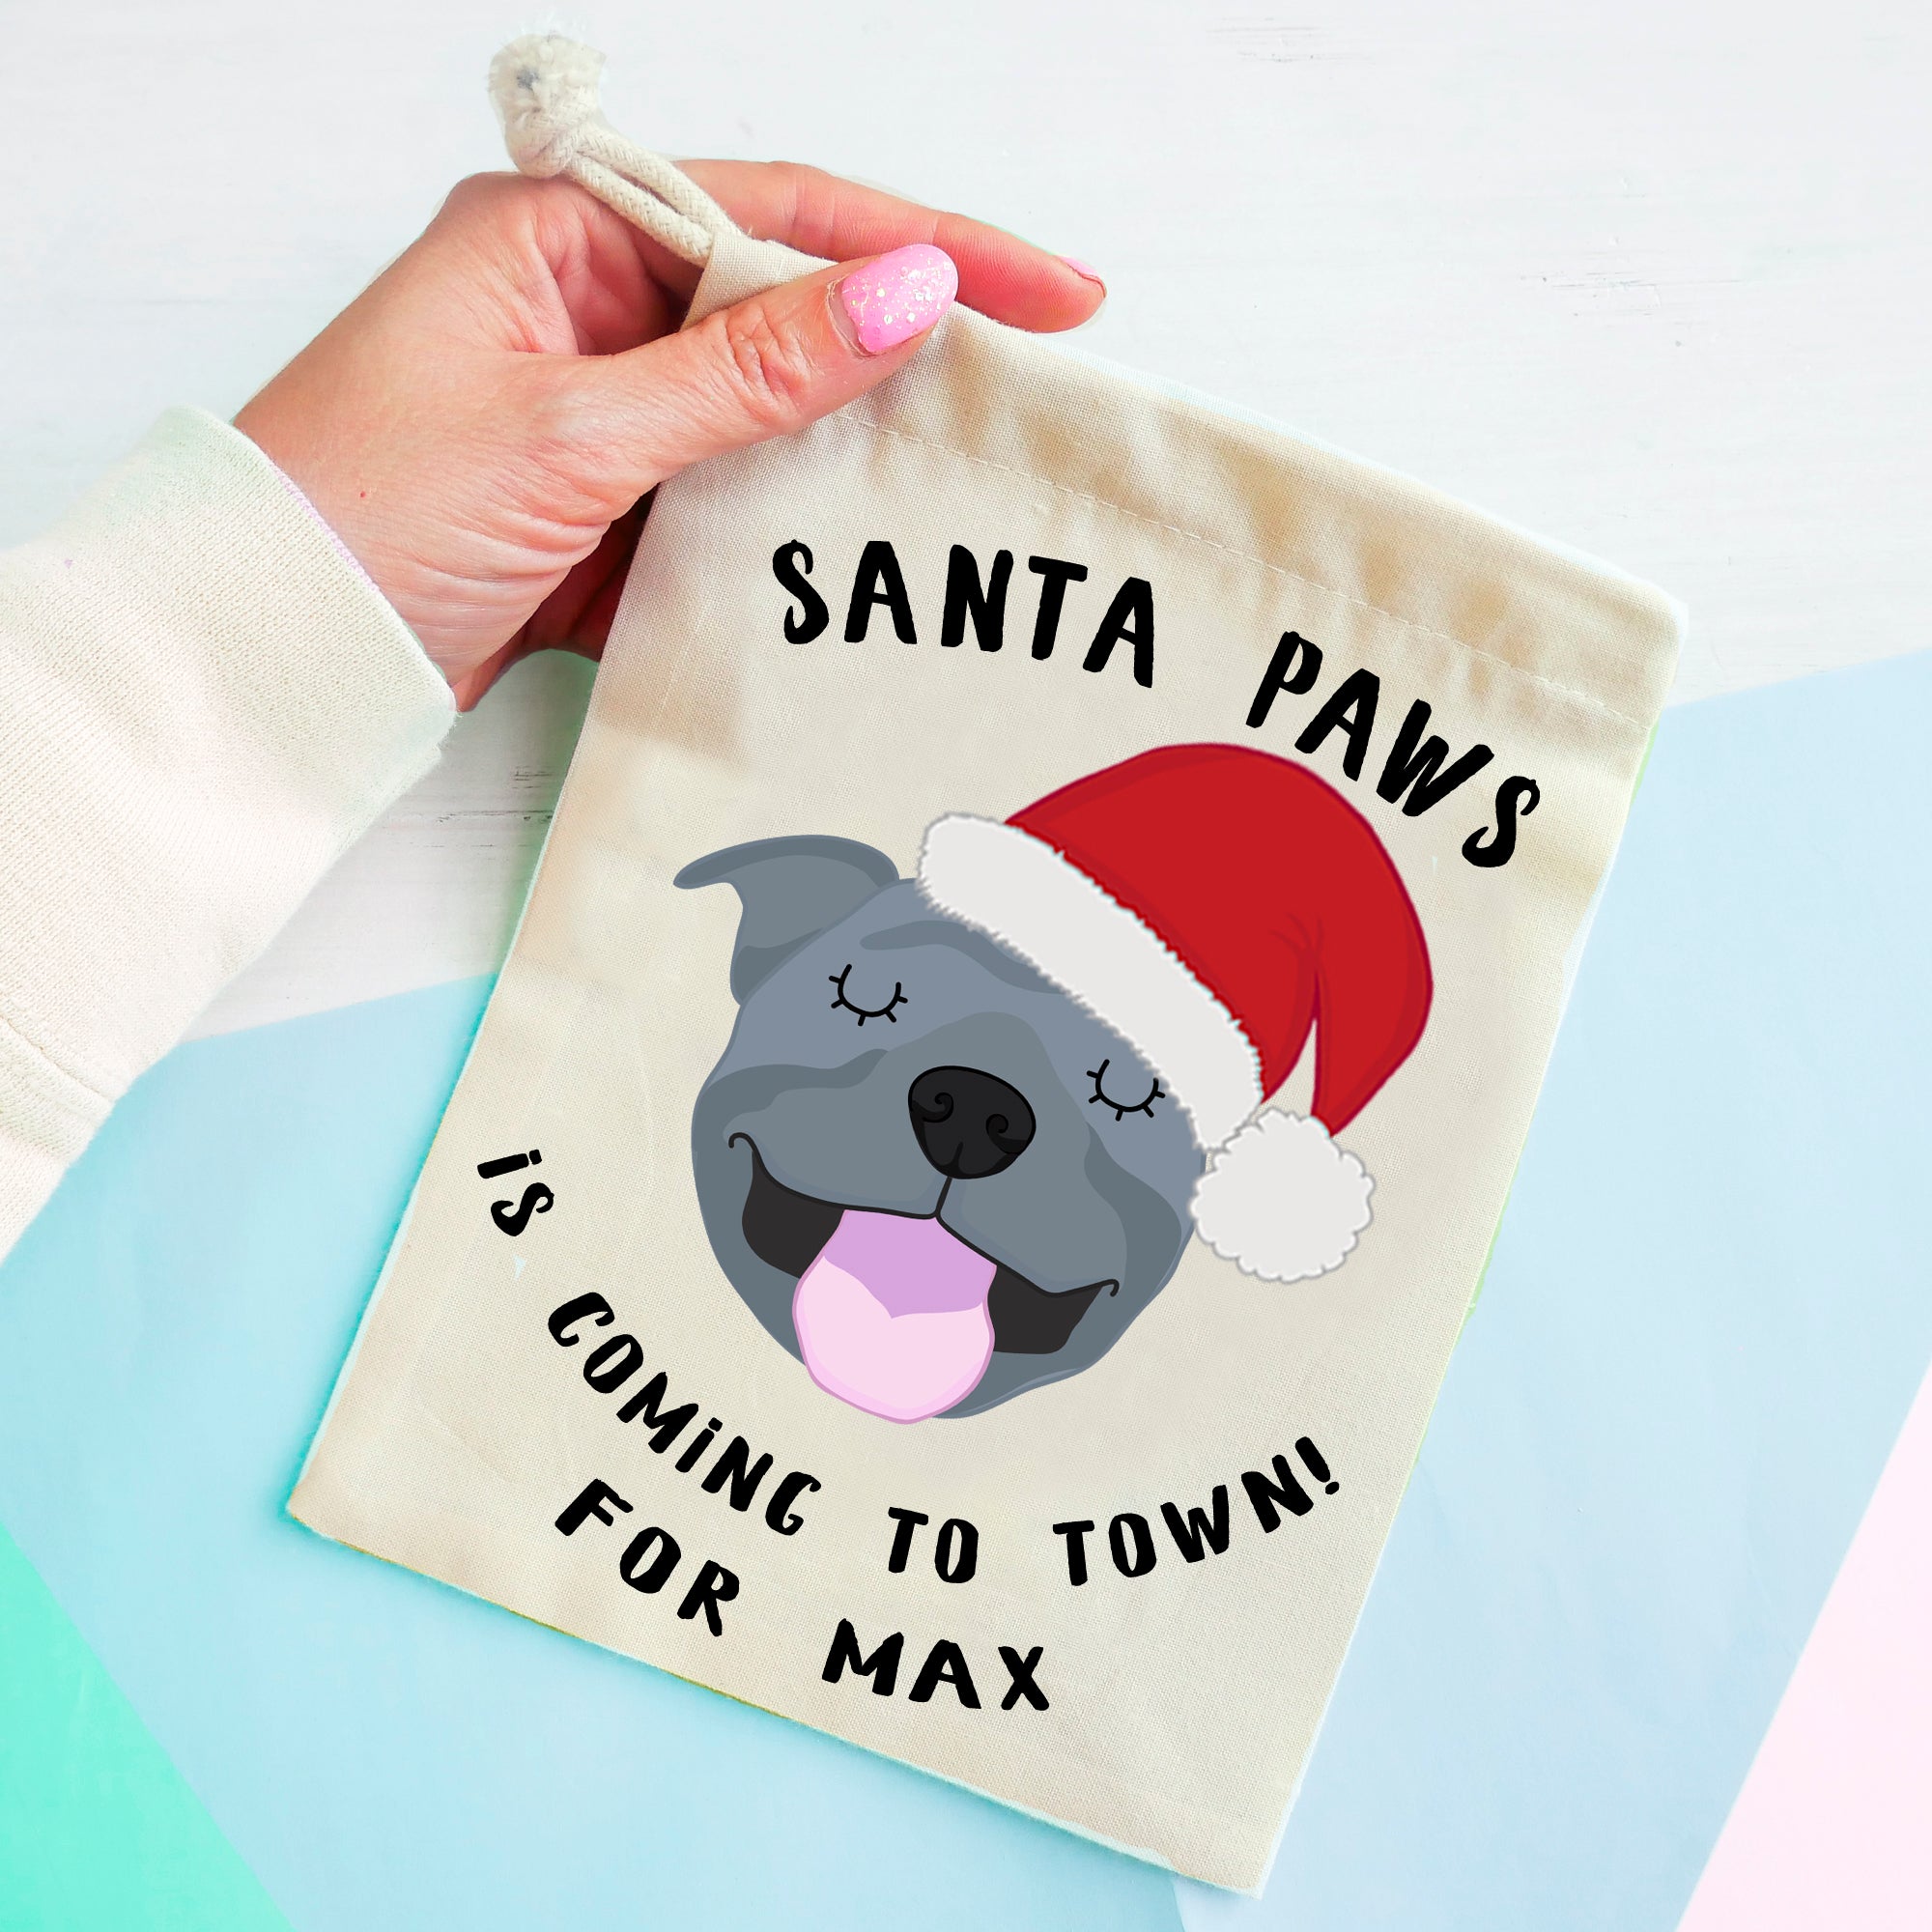 Staffordshire Bull Terrier Christmas Treat Present Bag  - Hoobynoo - Personalised Pet Tags and Gifts